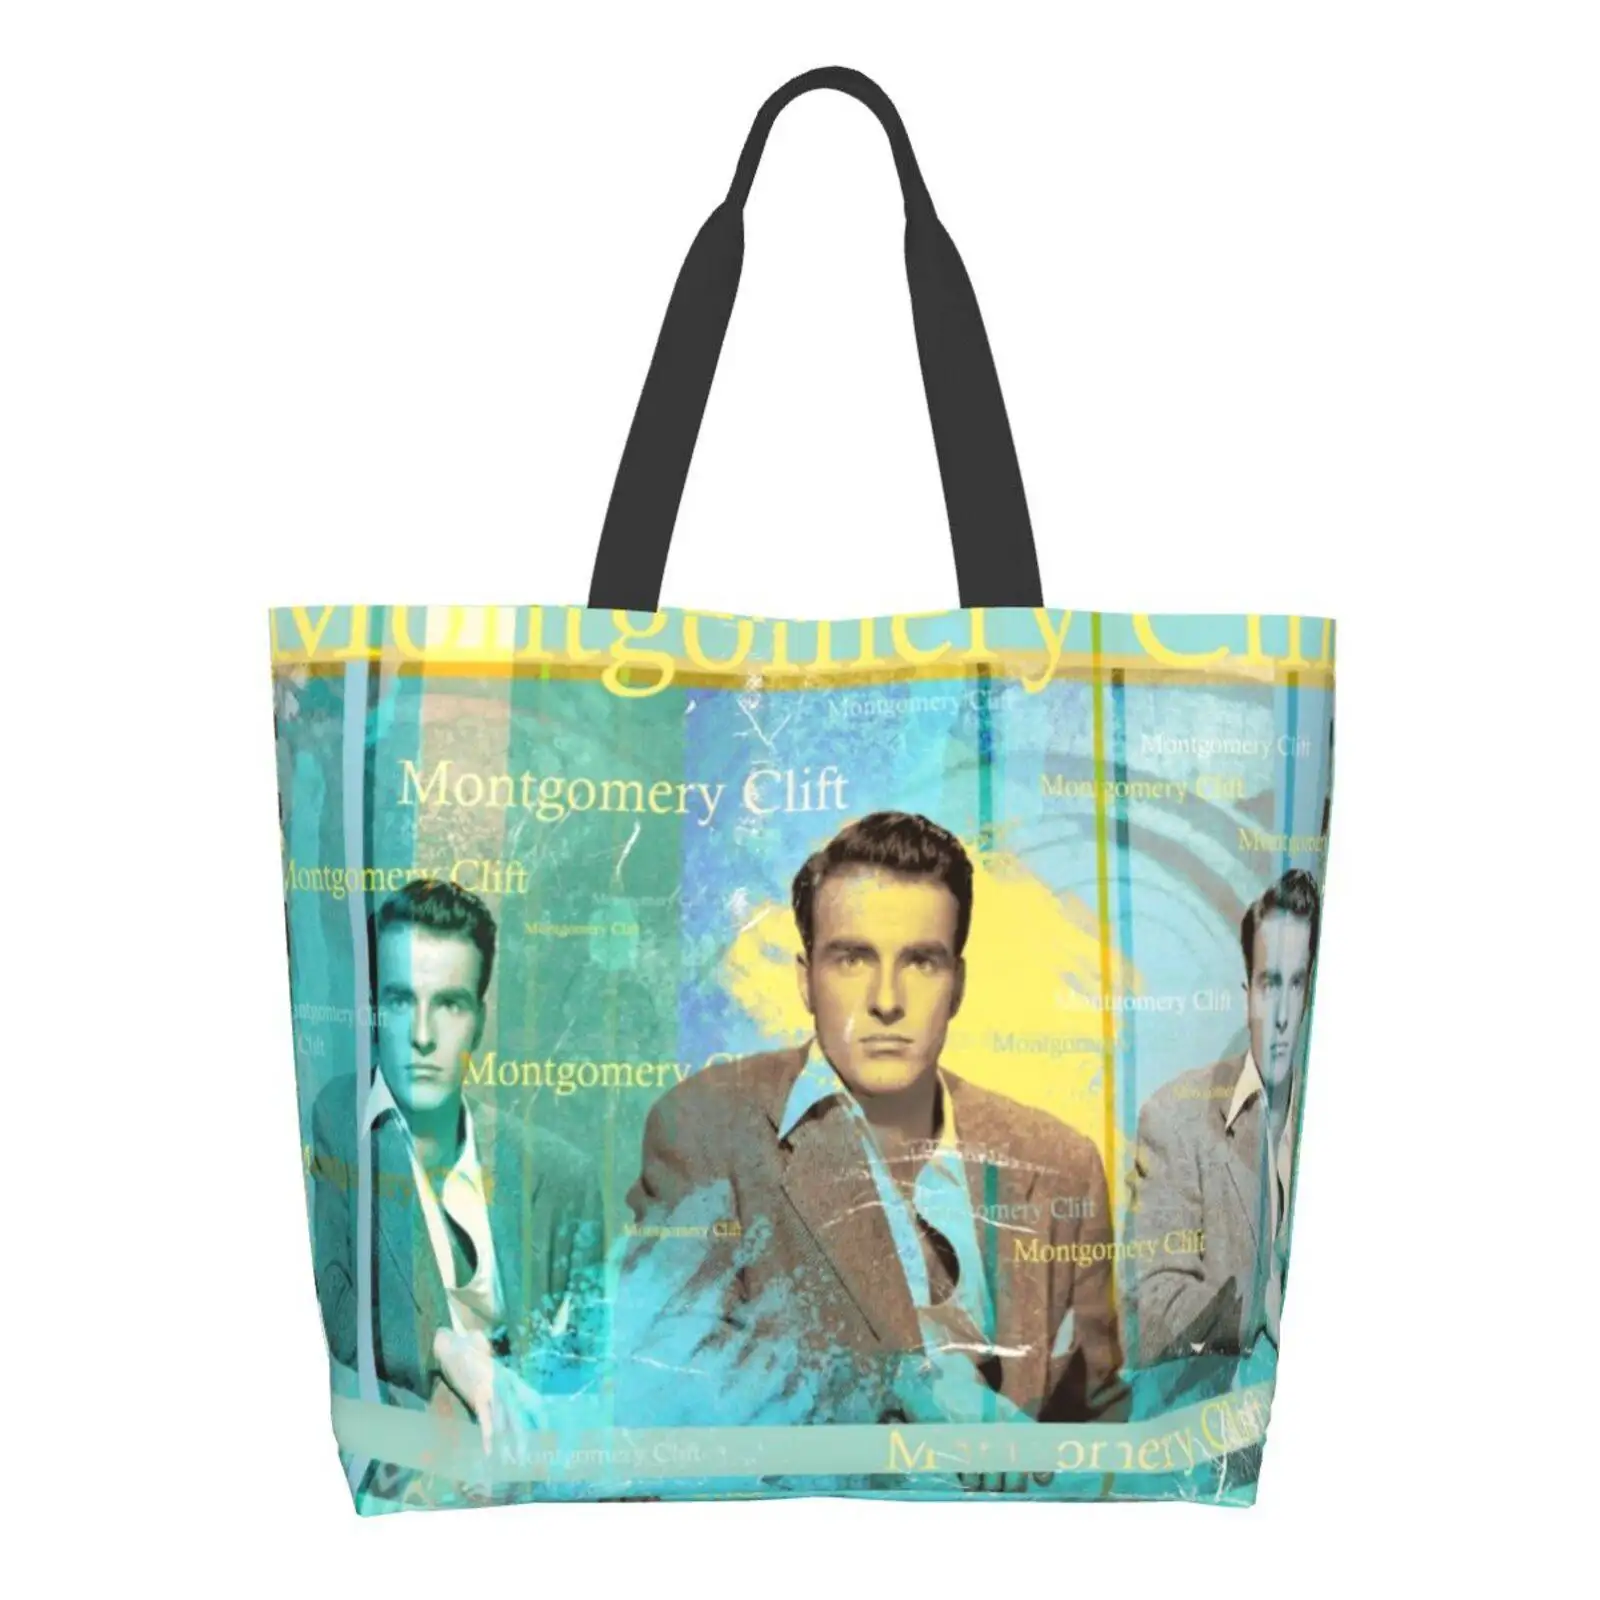 Among Other Things For The Film "A Place In The Sun" Shopping Bag Tote Large size The Search And Damn The Design By